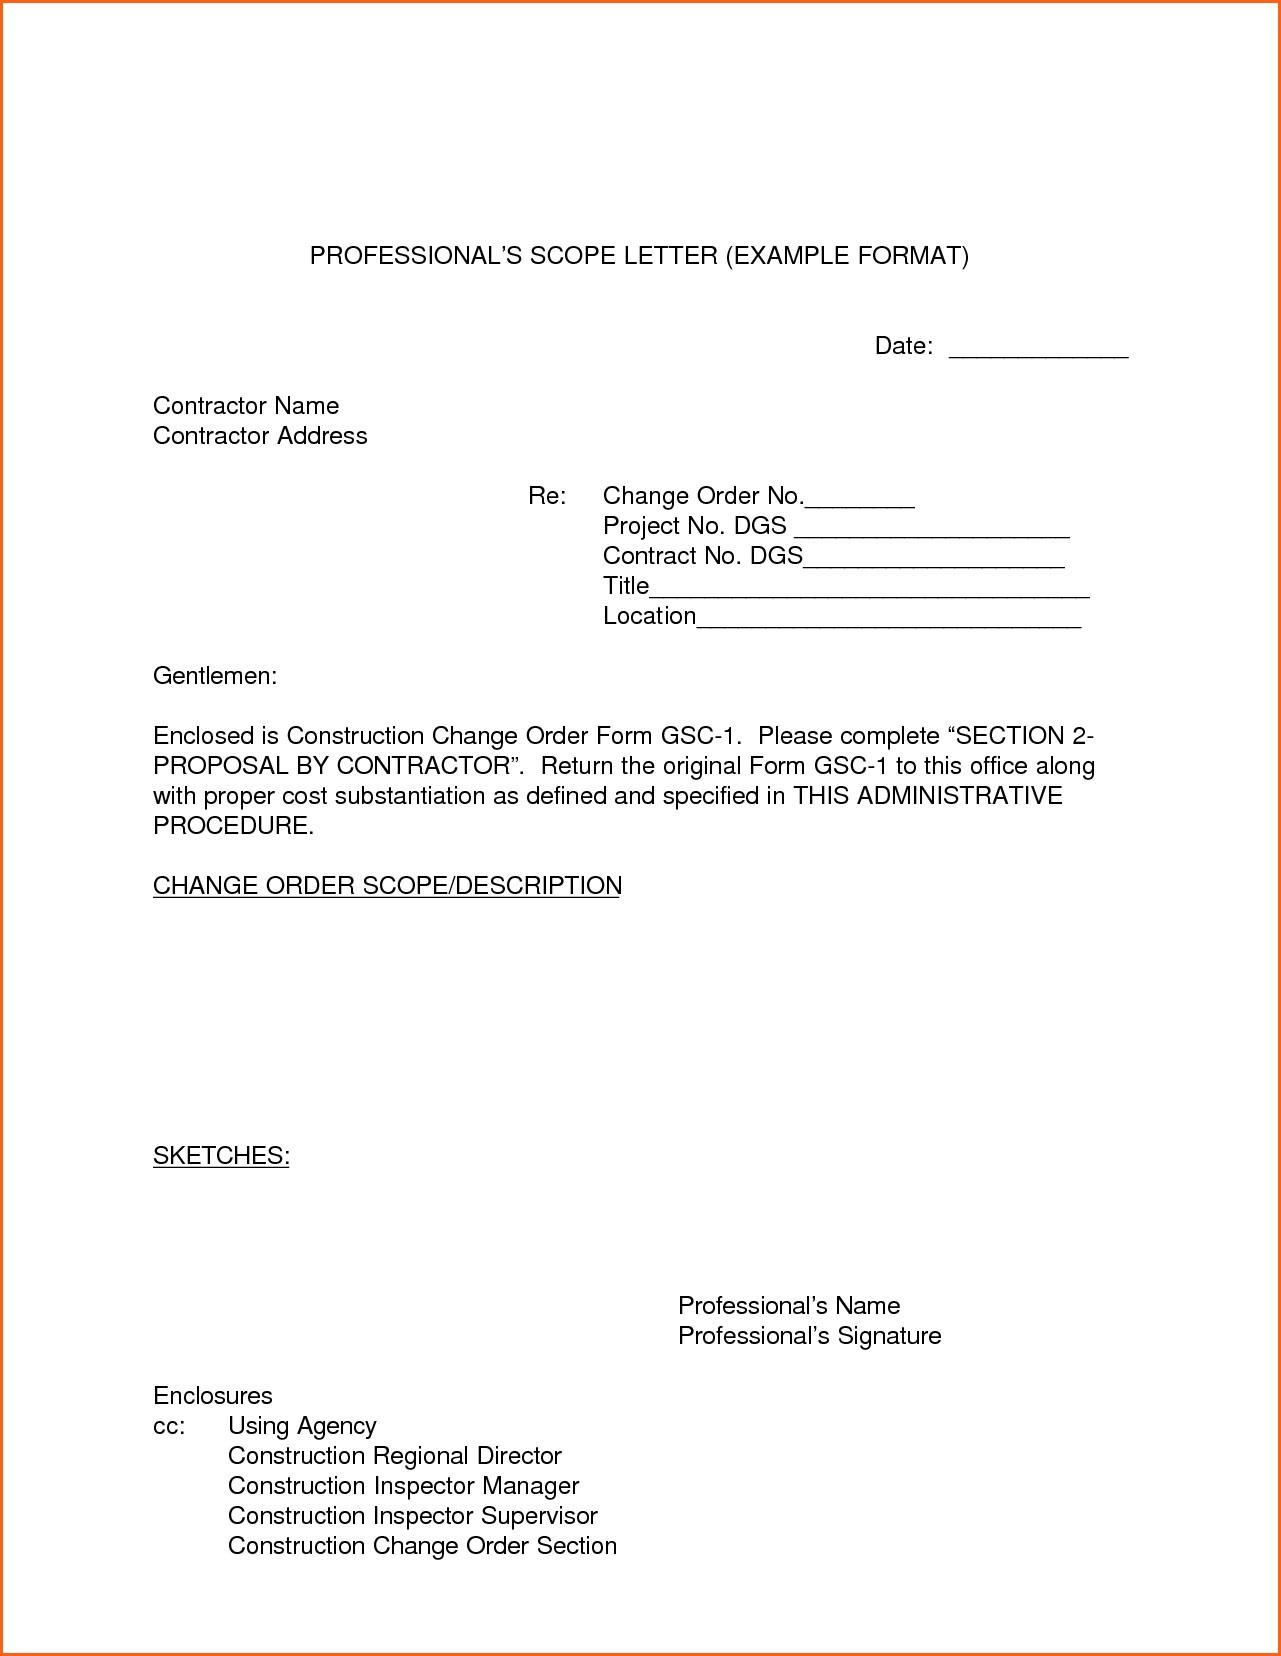 Flight Delay Compensation Letter Template - Plaint Letter Template Refund Fresh Luggage Claim Letter Example